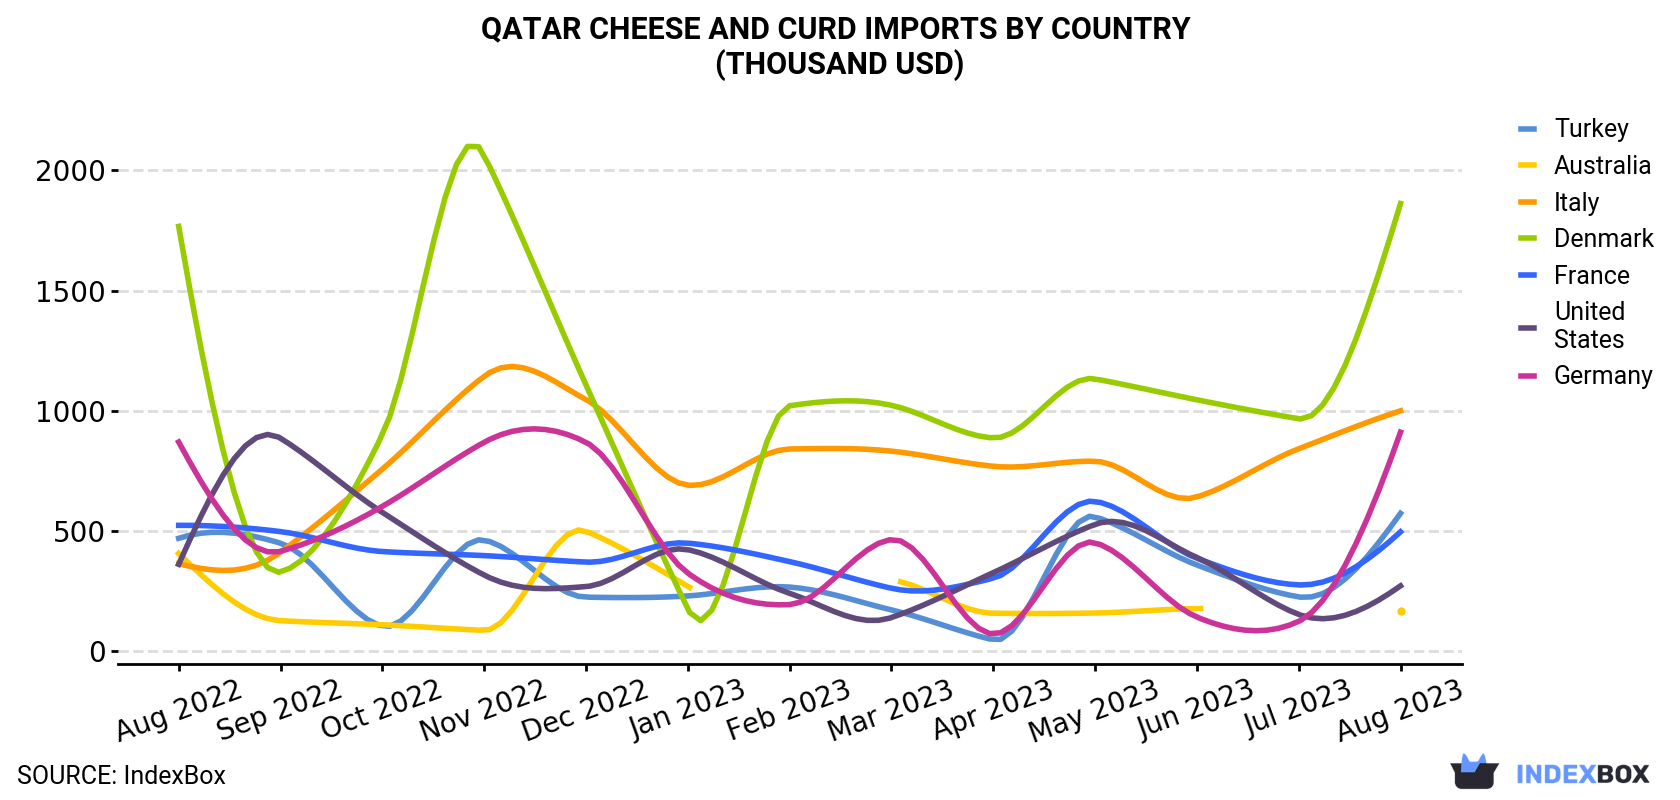 Qatar Cheese And Curd Imports By Country (Thousand USD)